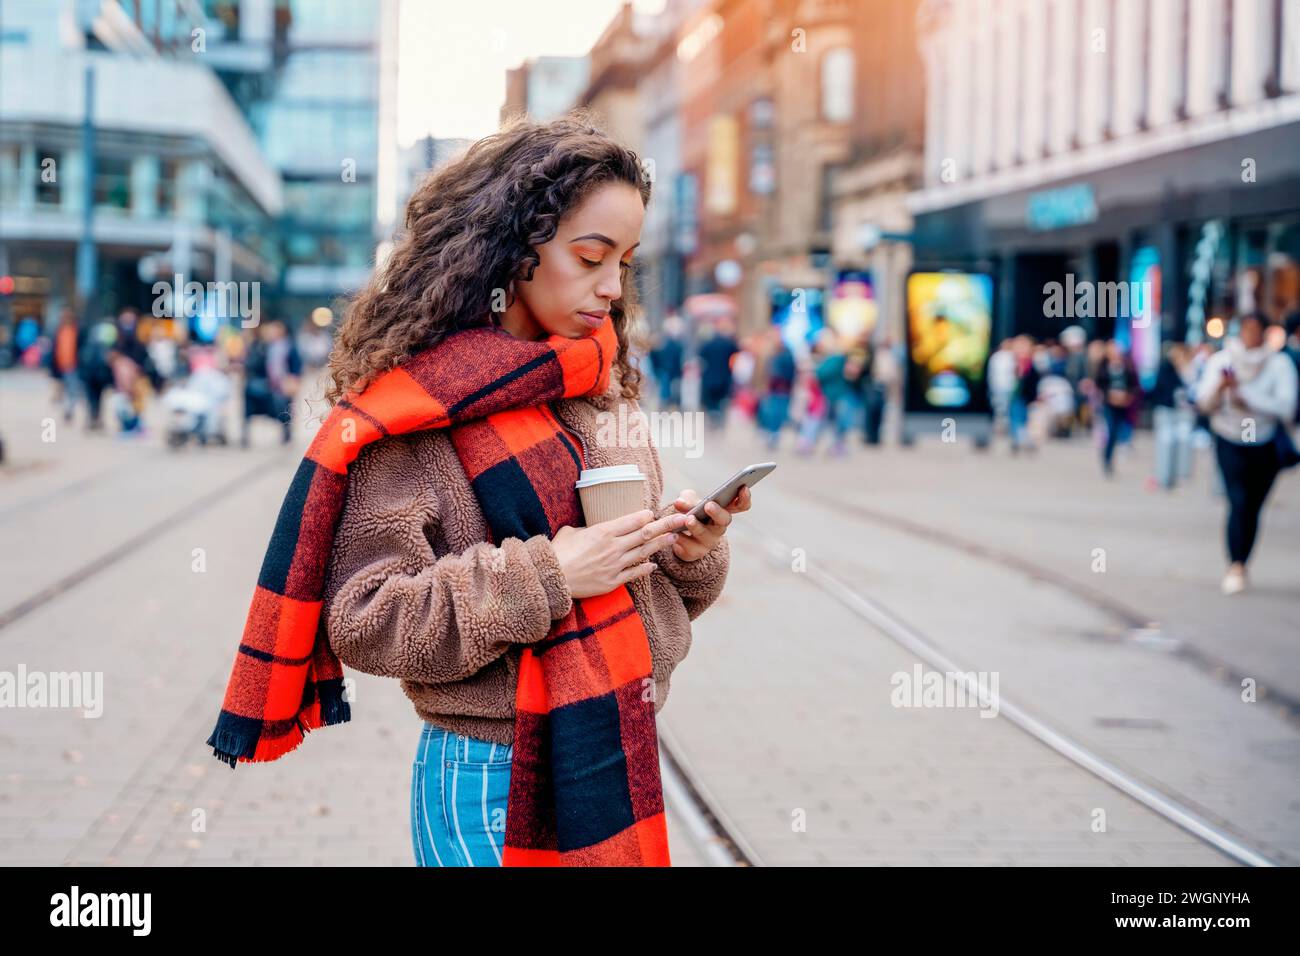 Outdoor portrait of upset  woman using a mobile phone and drinking coffee in Europe city Stock Photo